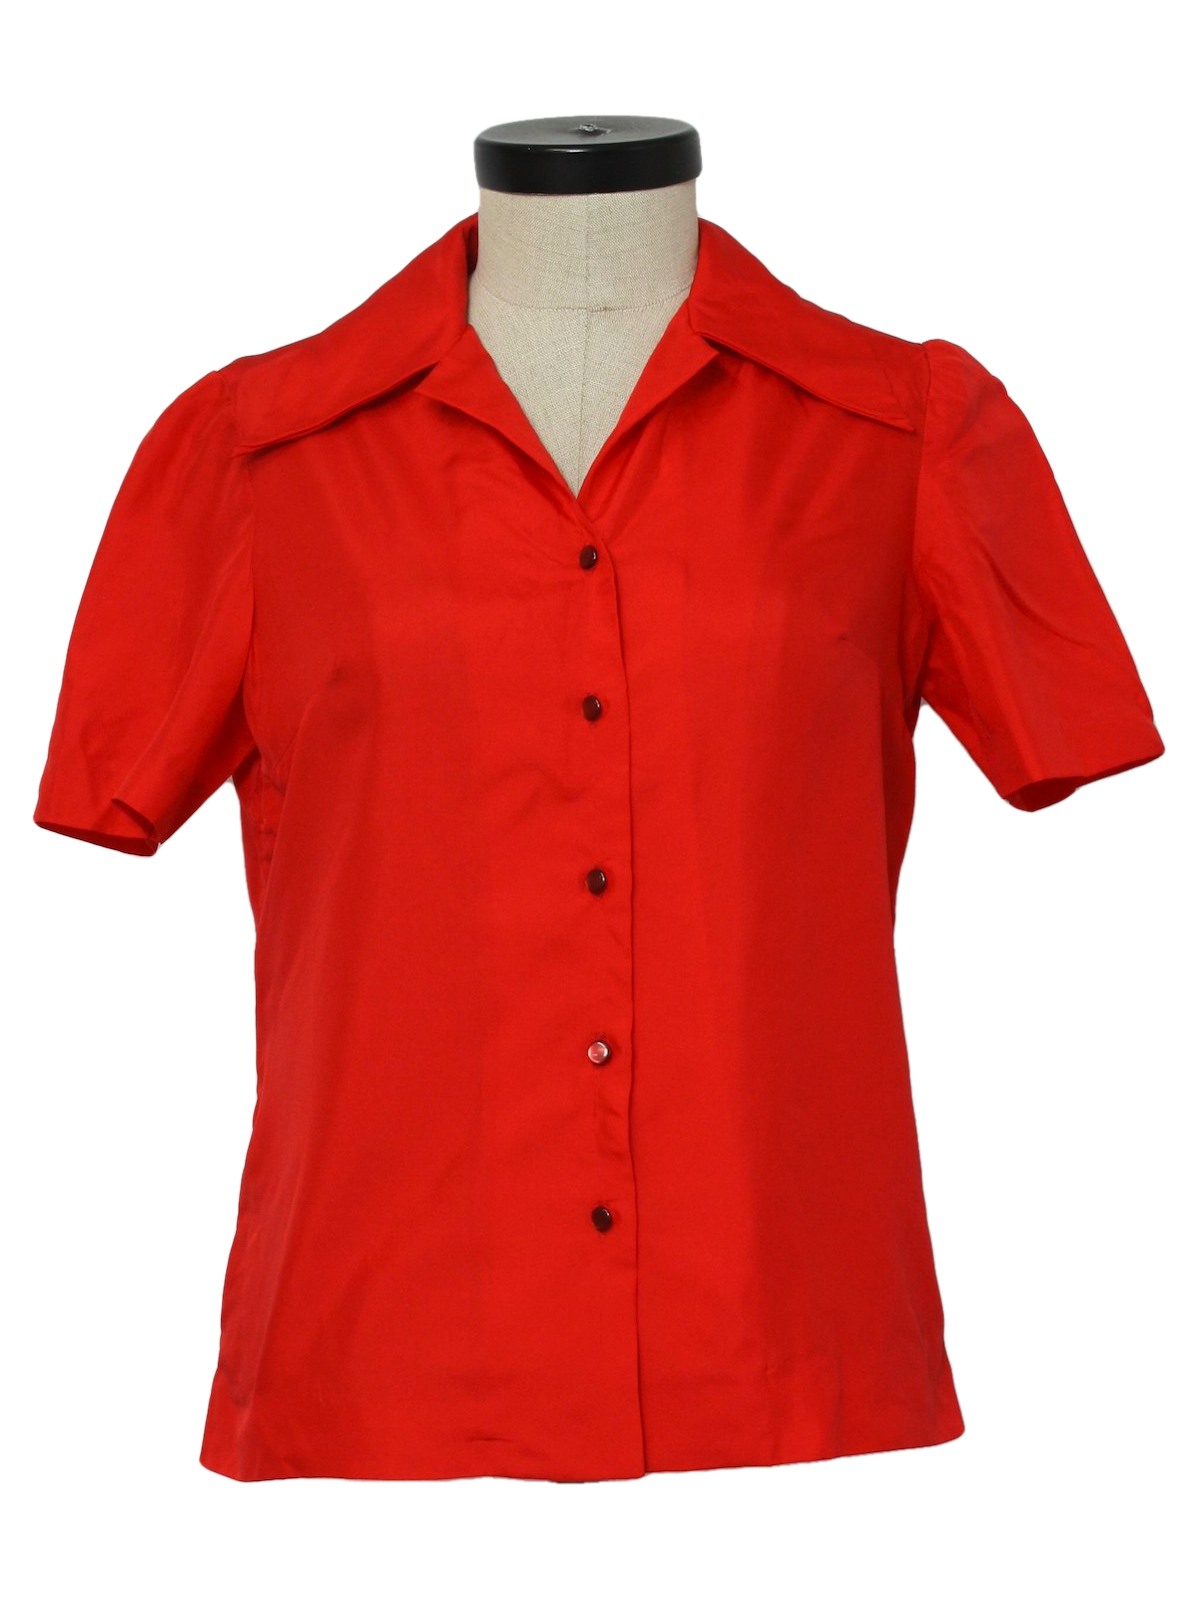 Seventies Vintage Shirt: 70s -home sewn- Womens red silky polyester ...